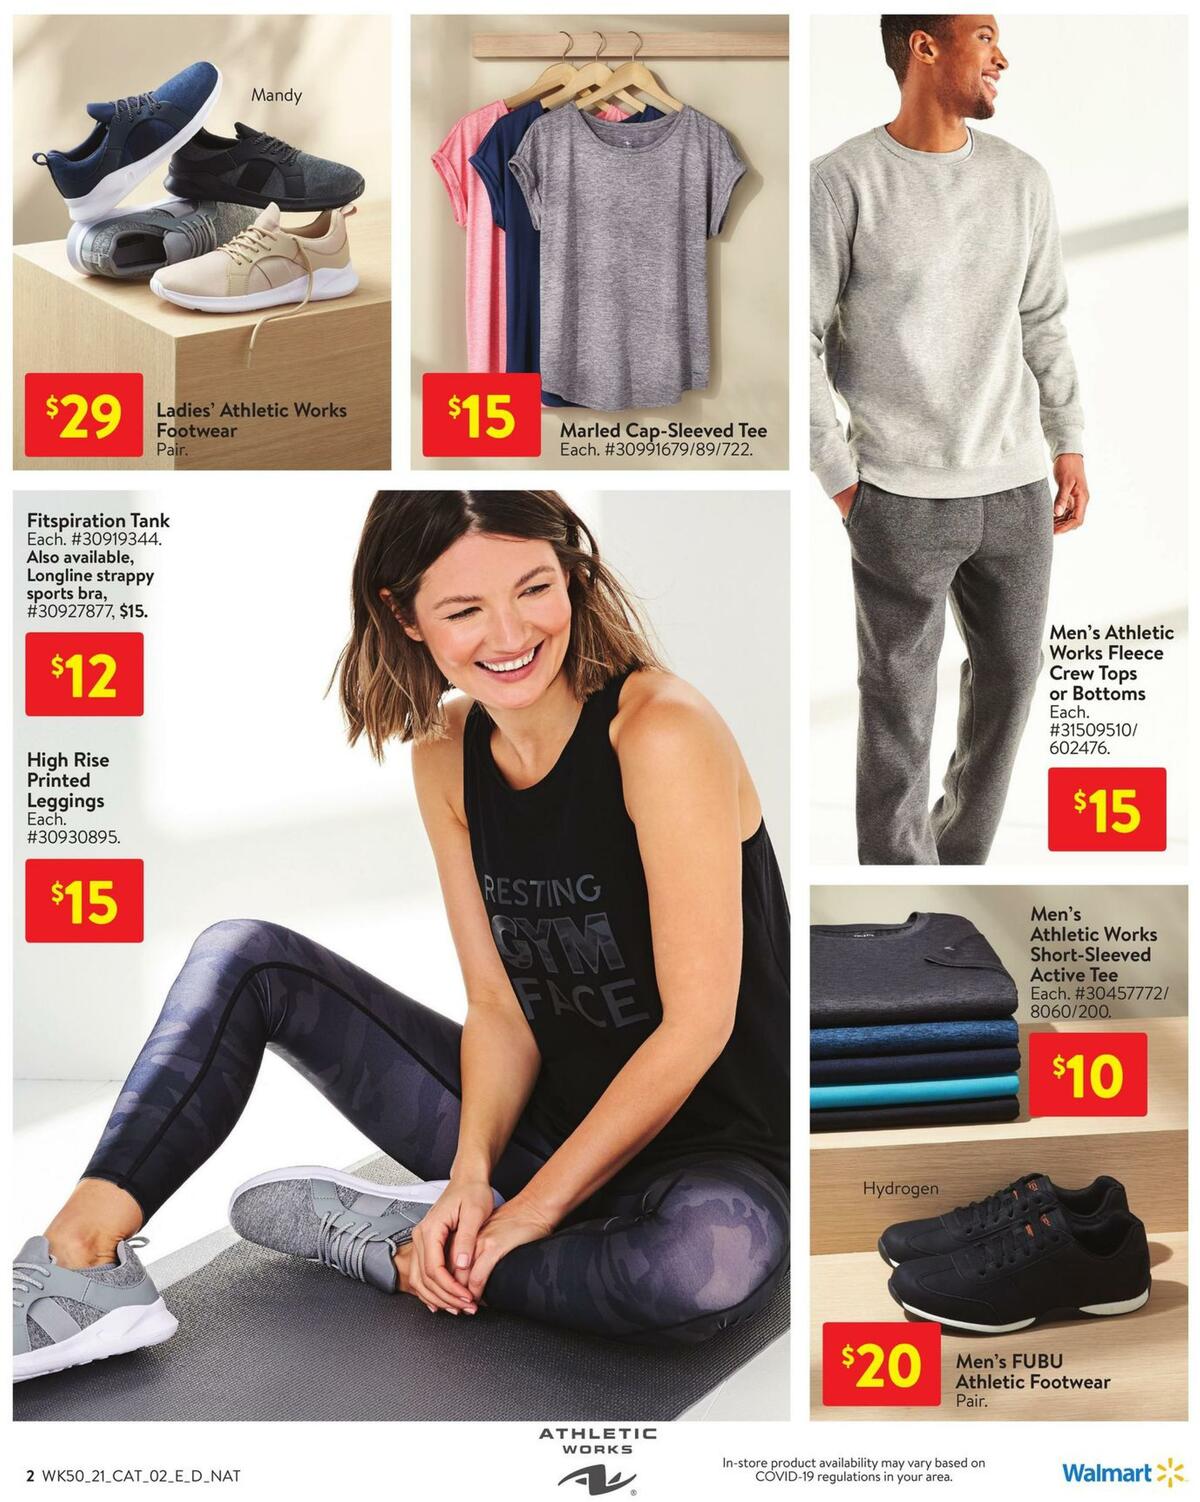 Walmart Living Flyer from January 7